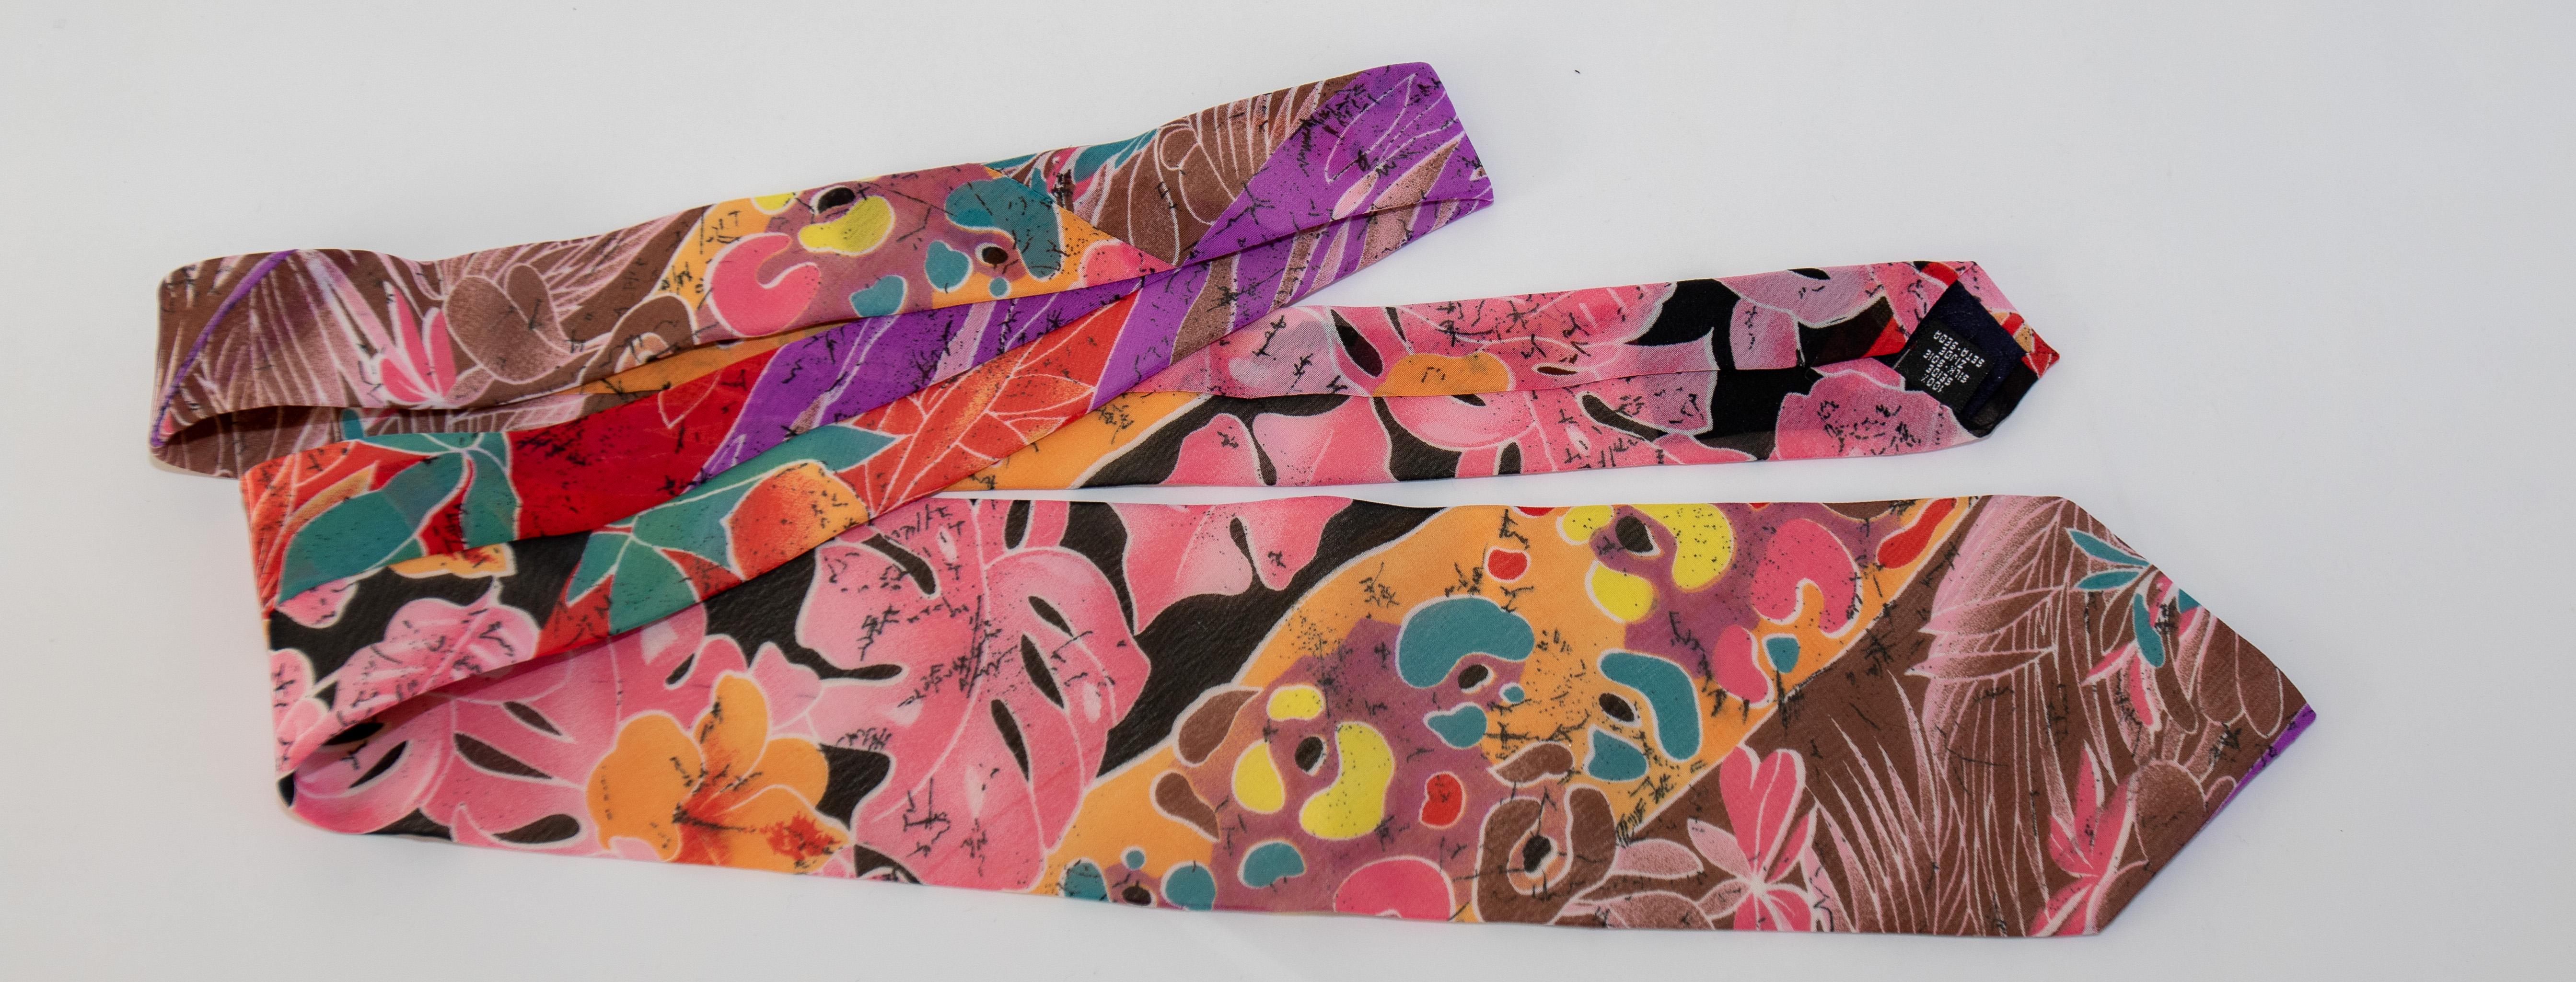 1990s GUCCI Silk Tie Abstract Design Italy 1